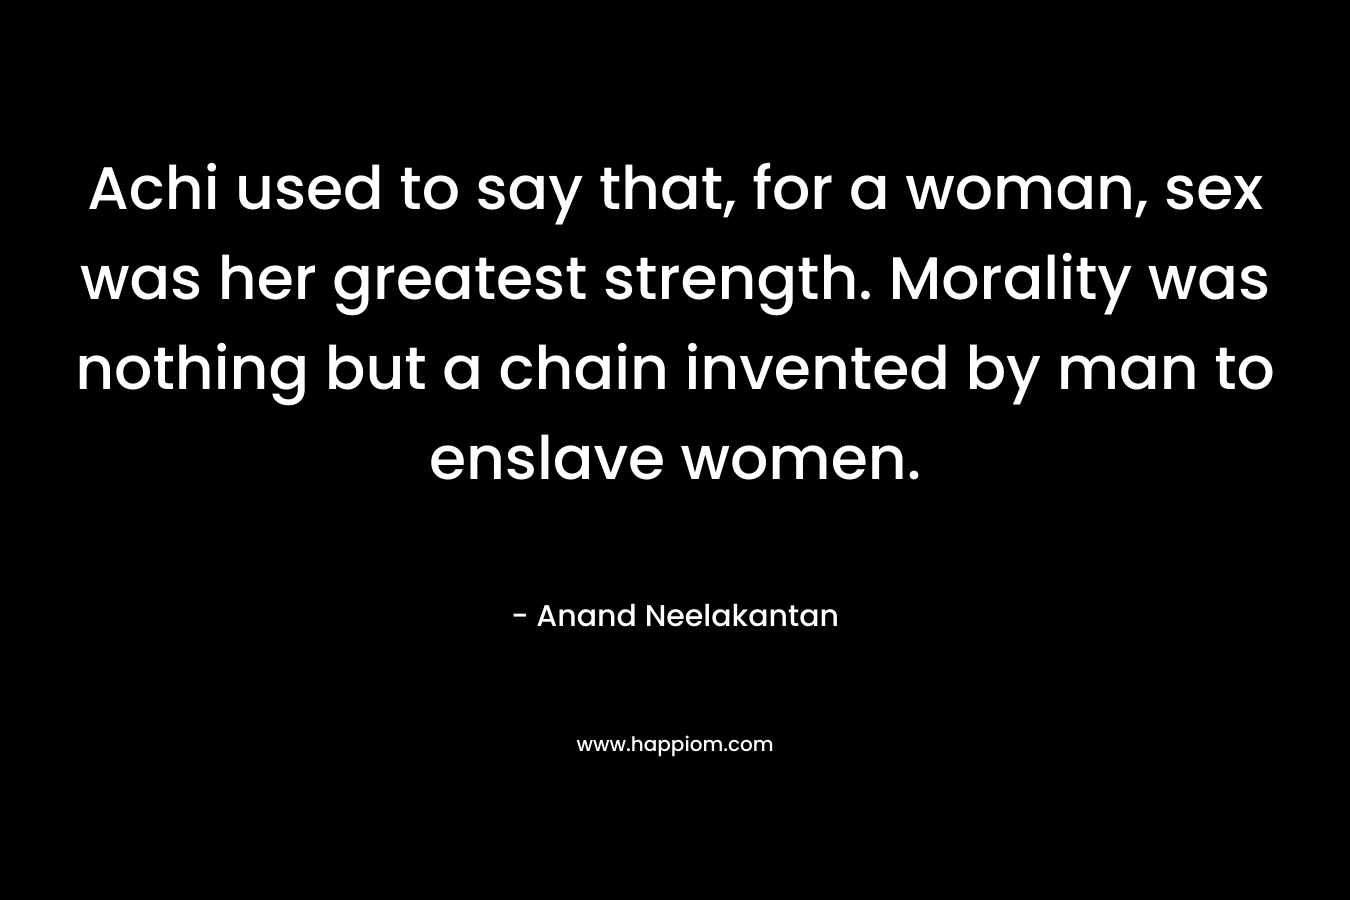 Achi used to say that, for a woman, sex was her greatest strength. Morality was nothing but a chain invented by man to enslave women.